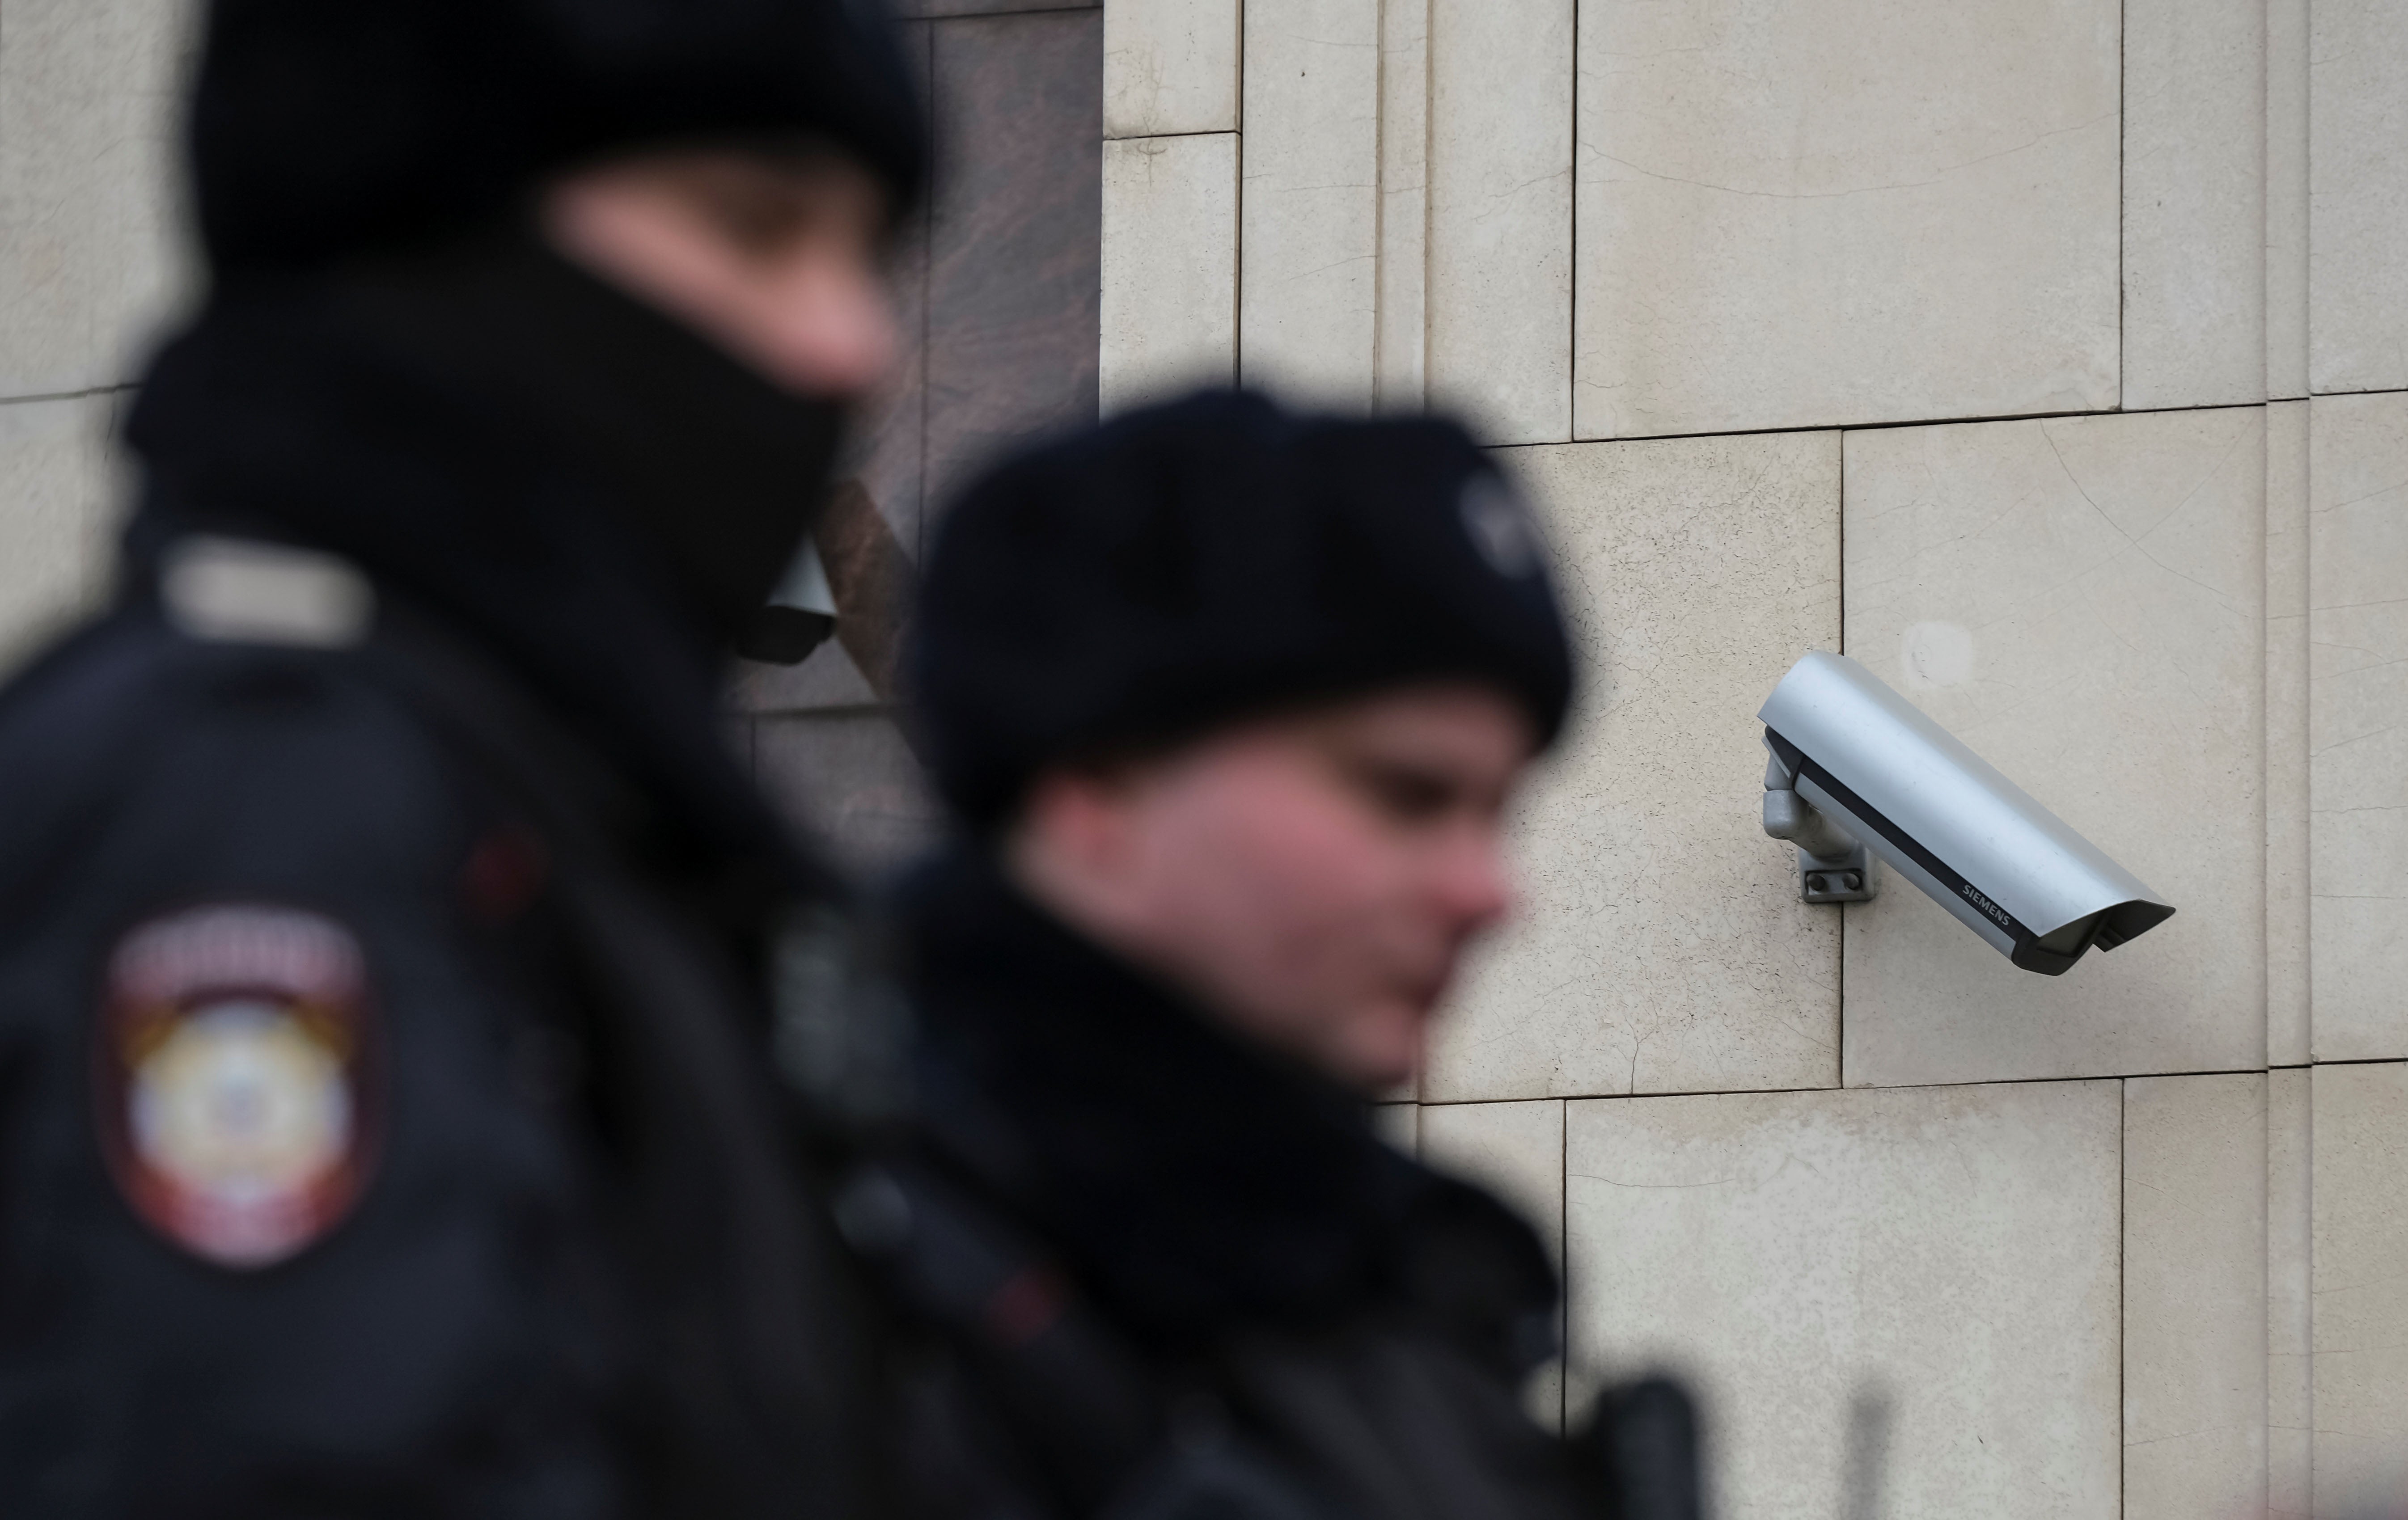 Police officers walk past a surveillance camera in central Moscow, Russia January 26, 2020.